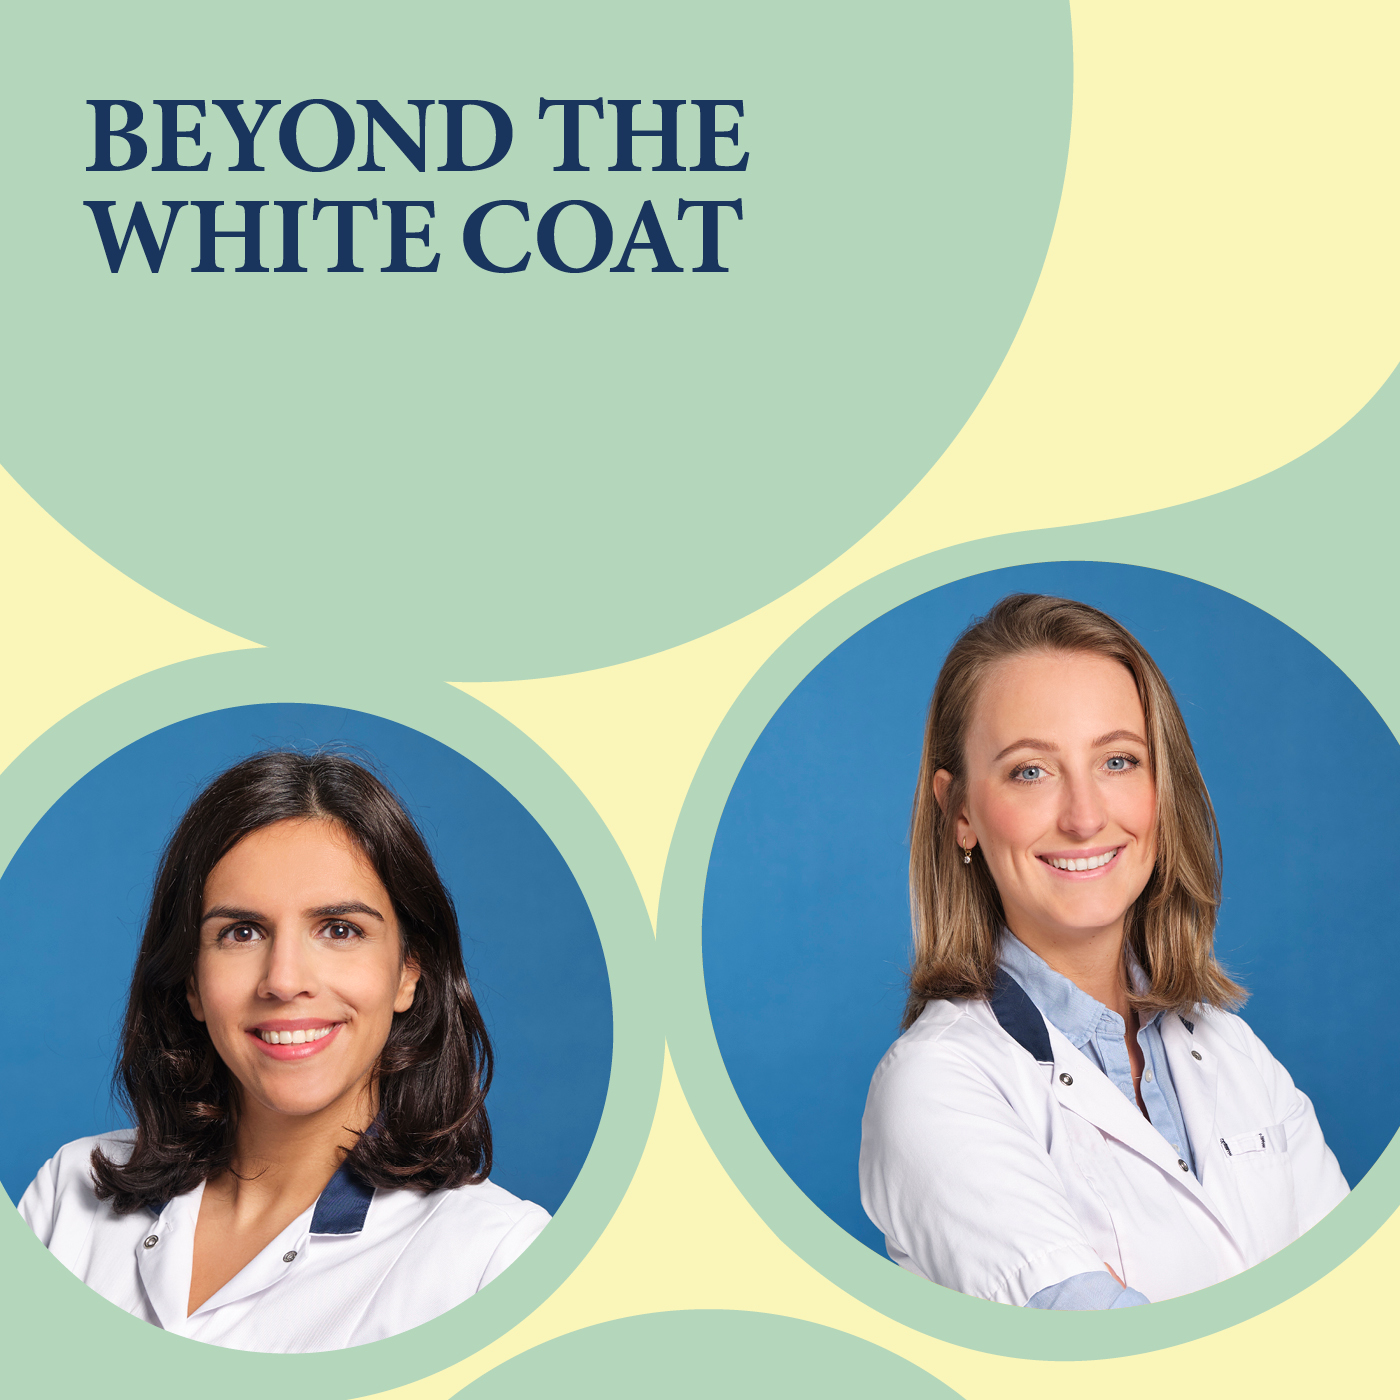 Beyond the White Coat